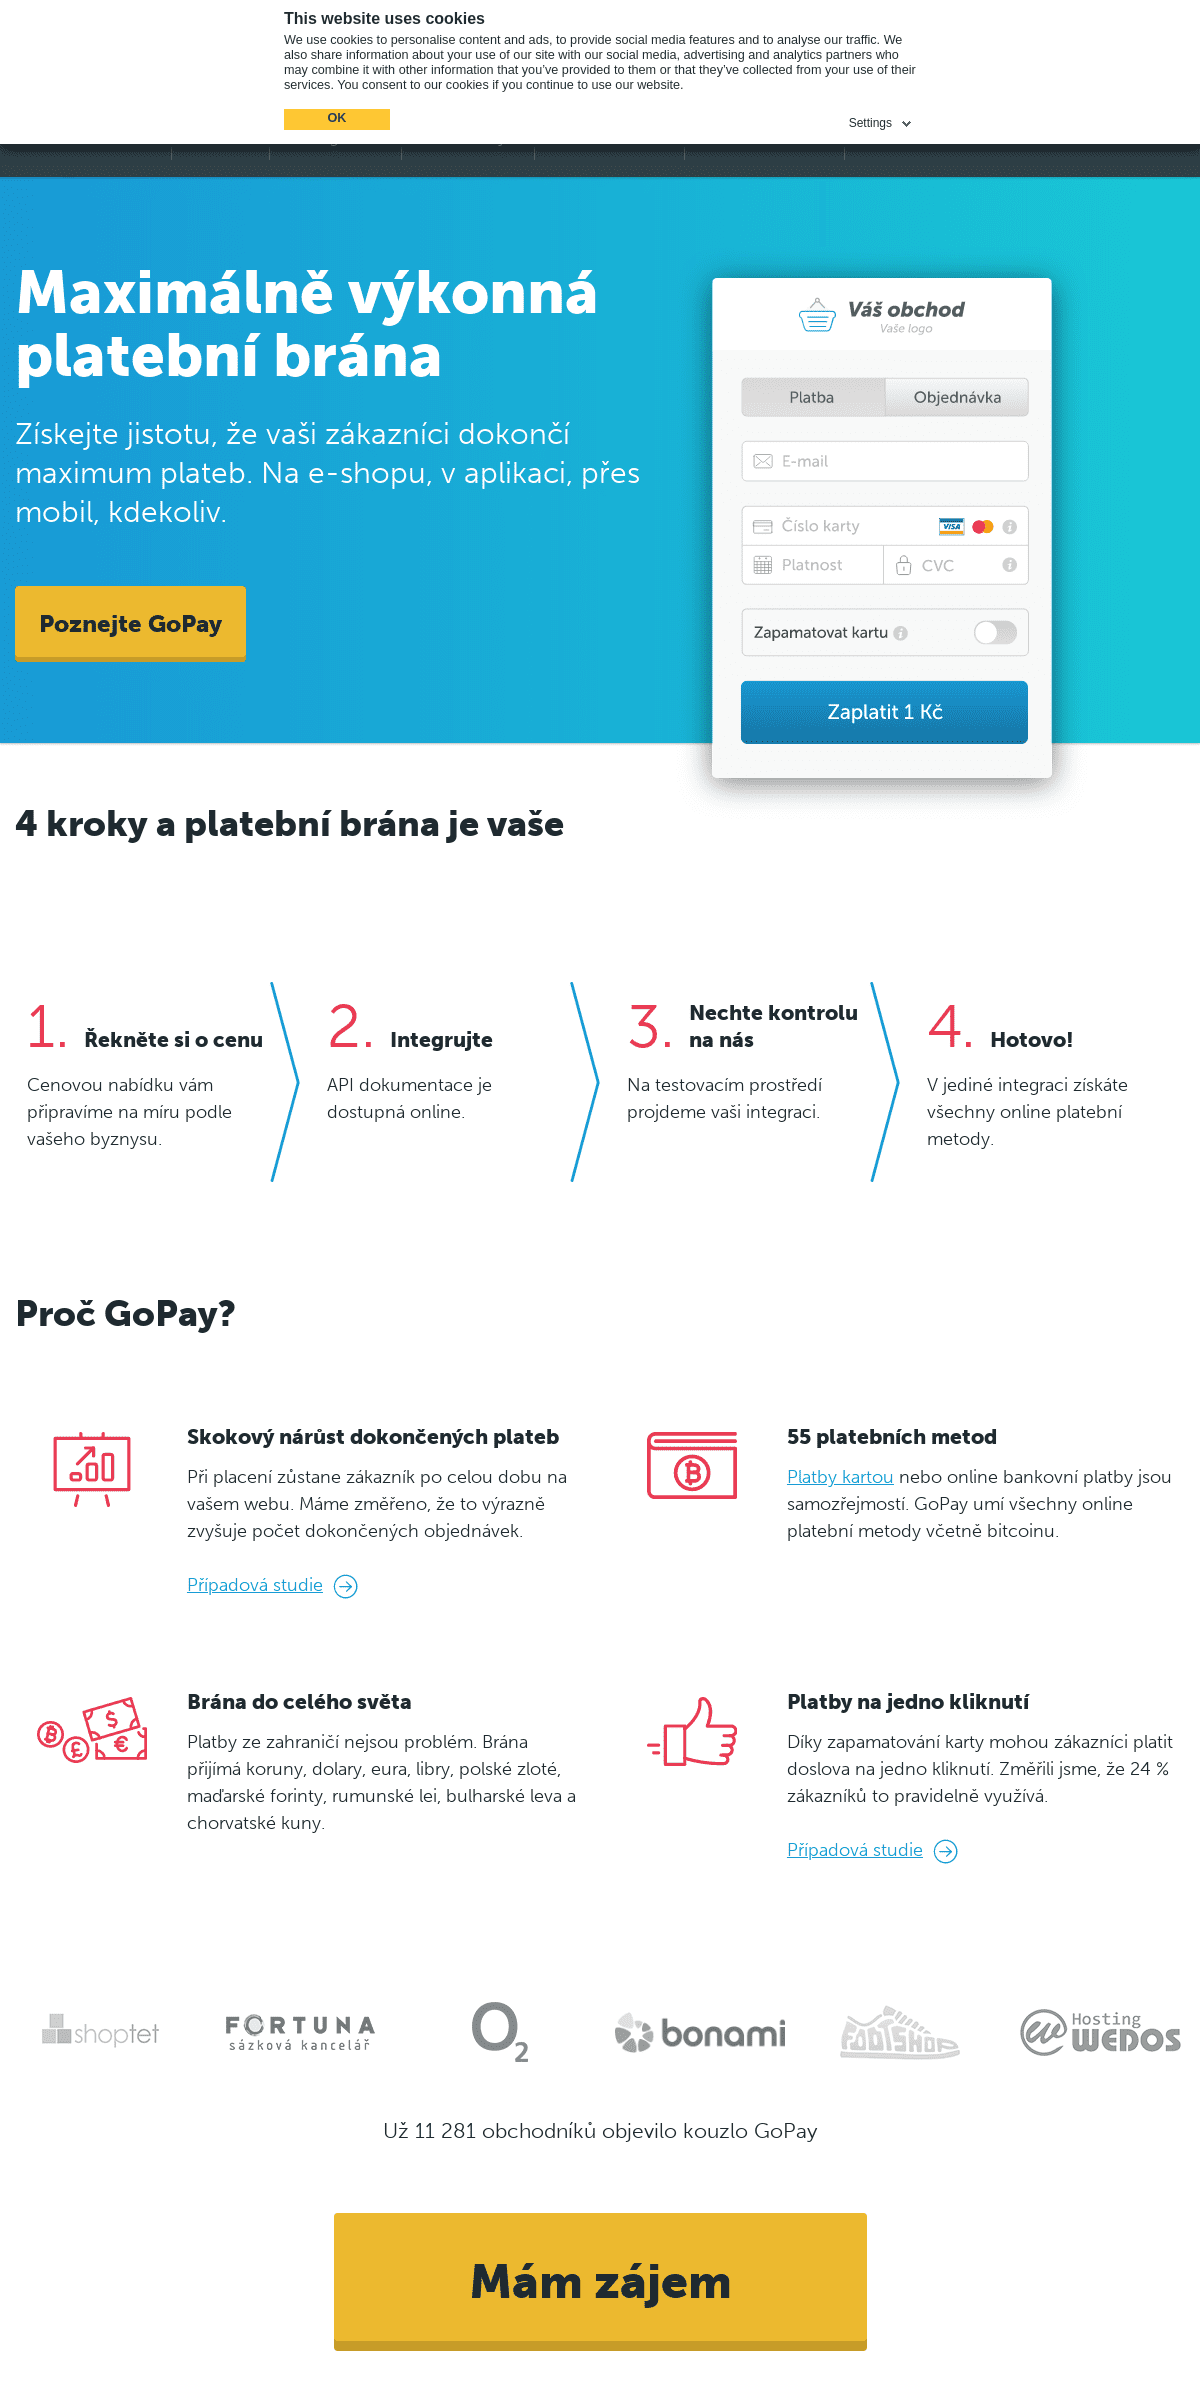 A complete backup of gopay.cz